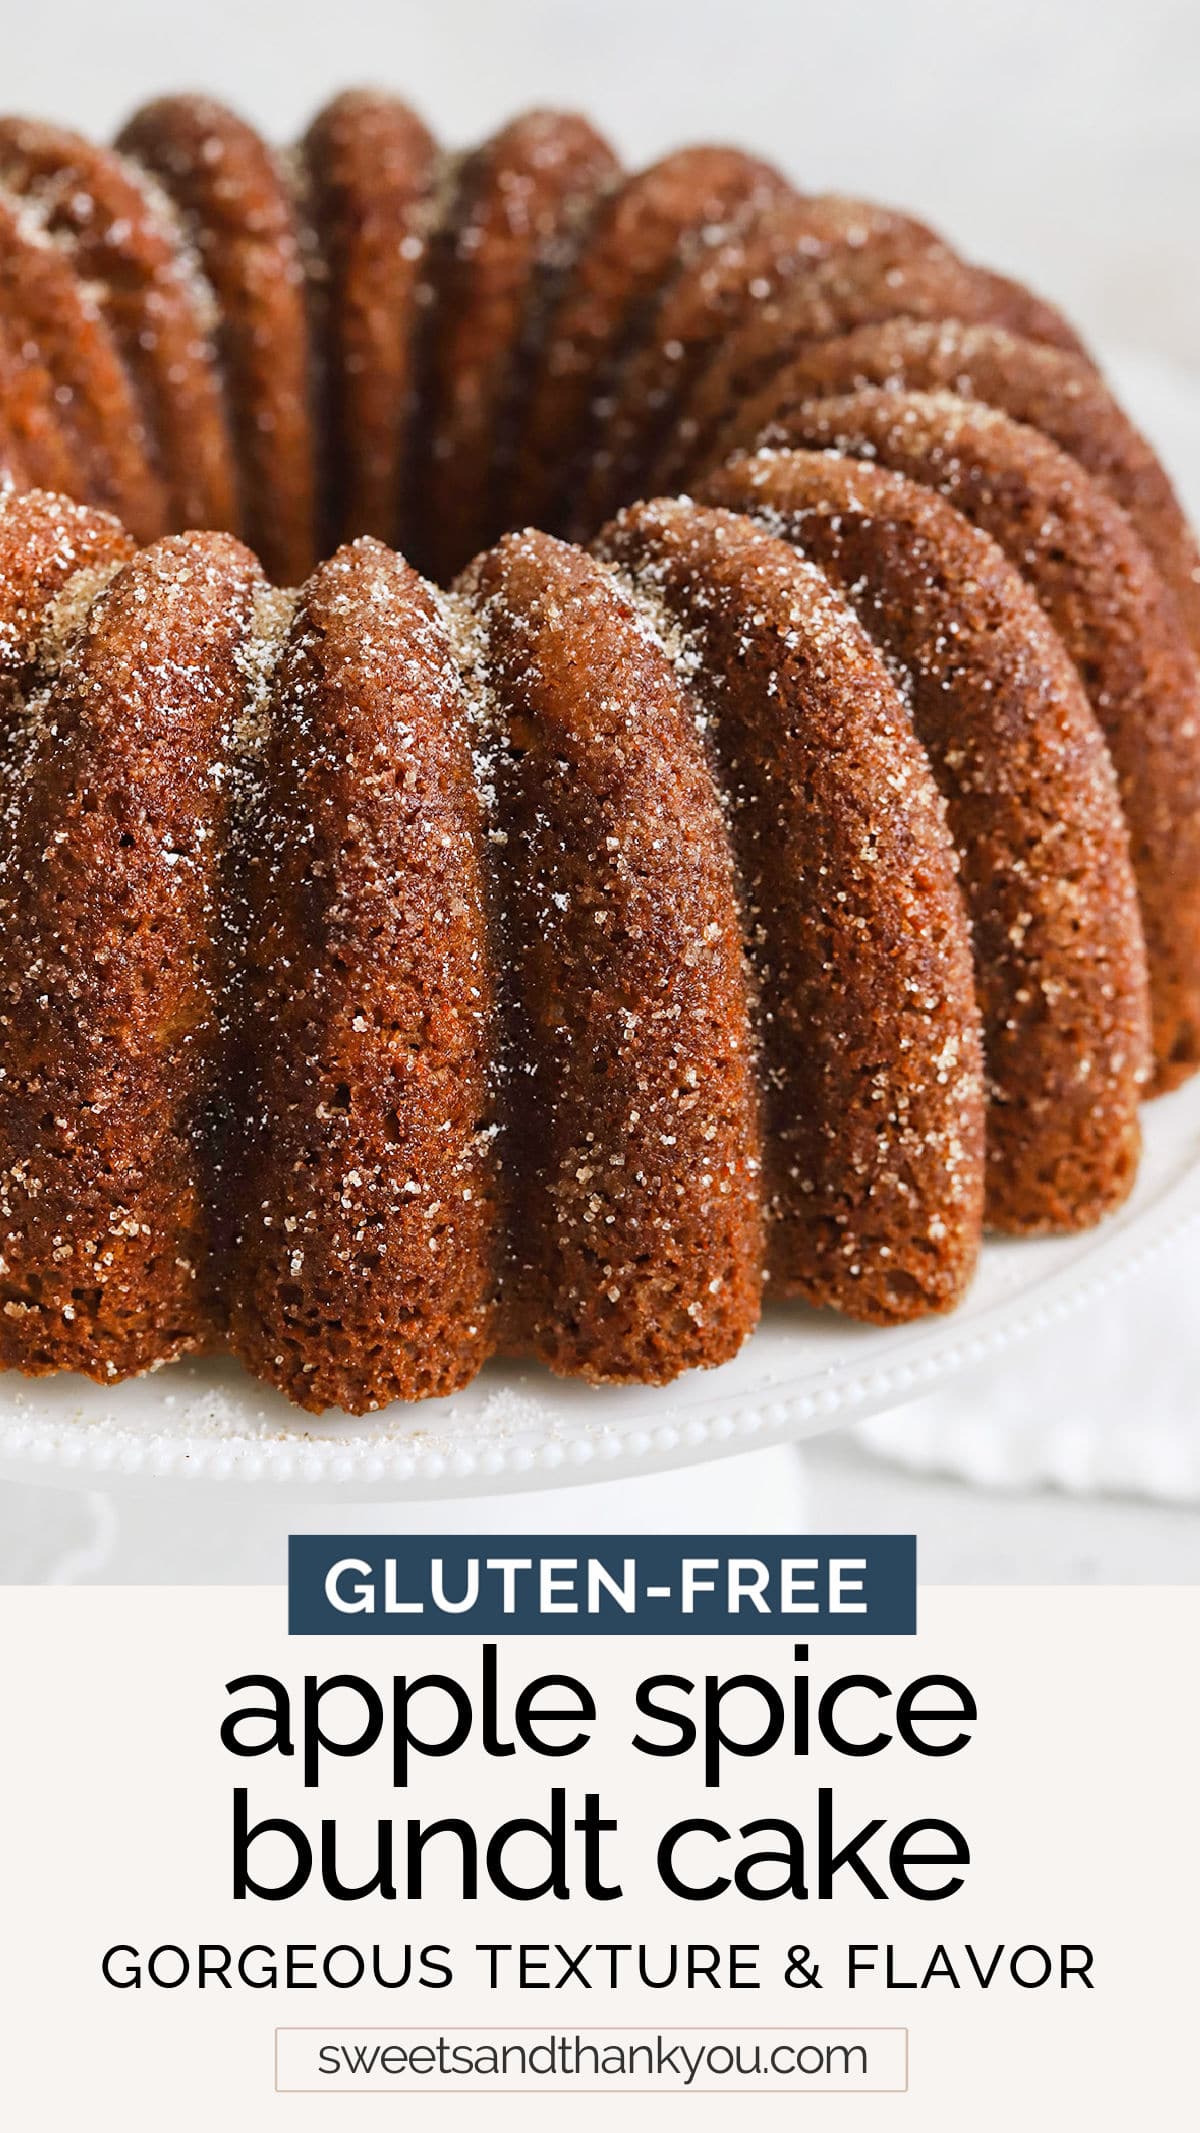 Gluten-Free Apple Spice Bundt Cake. This gluten-free apple bundt cake has warm flavors & gorgeous tender texture. Try it with caramel sauce or cinnamon sugar for a fun finish! / Apple Spice Bundt Cake Recipe / Gluten Free Bundt Cake Recipe / Fall Dessert / Gluten Free Cake / Gluten Free Apple Cake / How to keep bundt cake from sticking / Holiday Dessert / Thanksgiving Dessert / Christmas Dessert / Christmas Cake / Gluten Free Spice Cake // Spice Cake Bundt // Apple Bundt